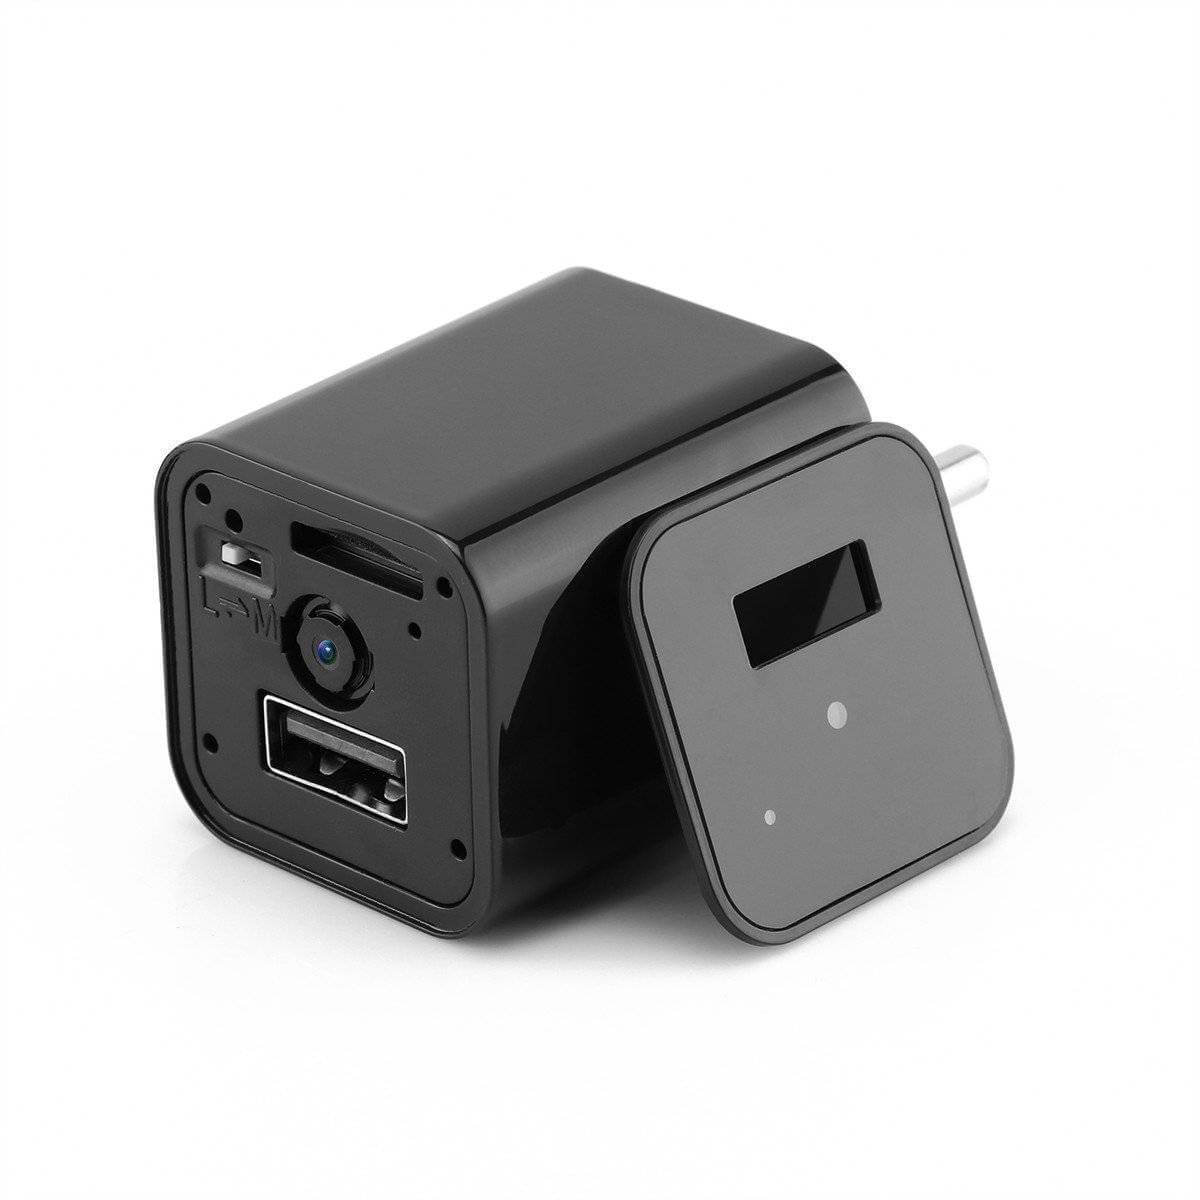 Hd 1080P Usb Wall Charger Camera Wireless Home Security Camcorder